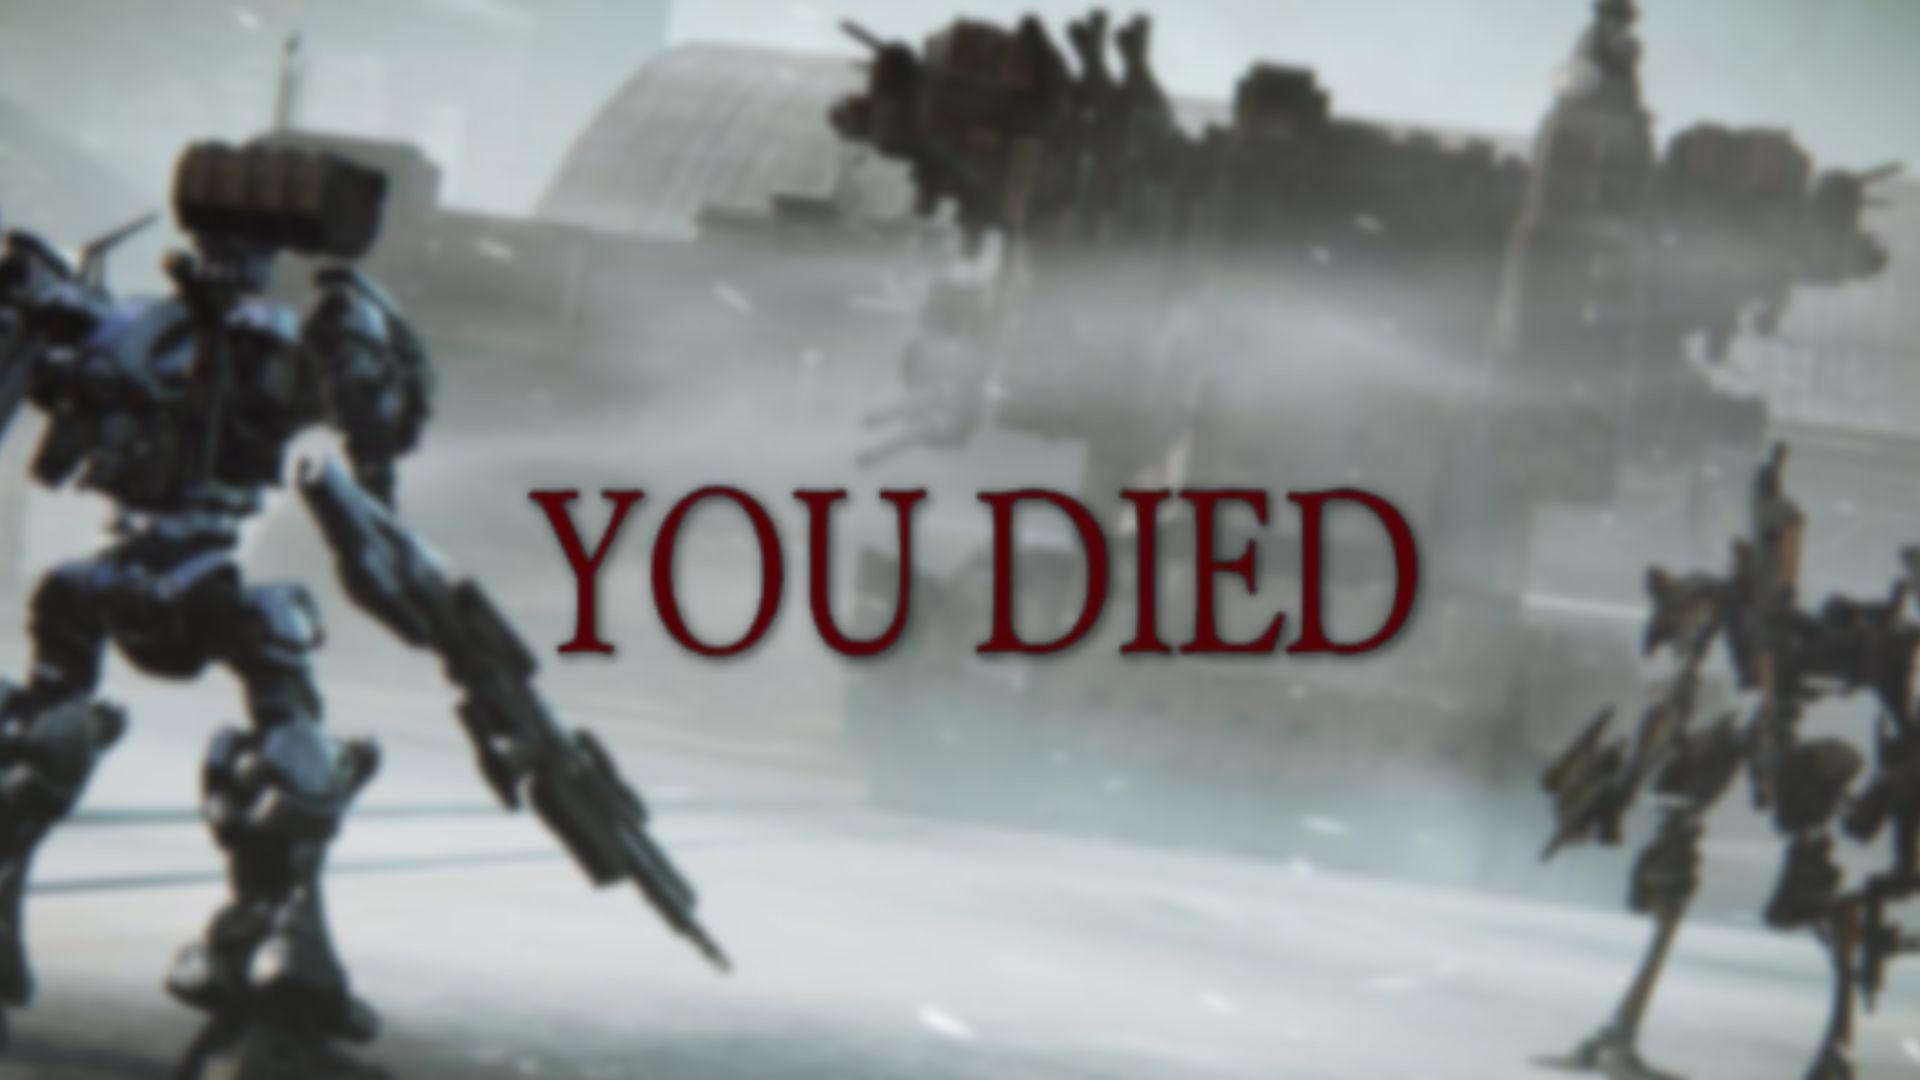 armored core 6 and you died souls message